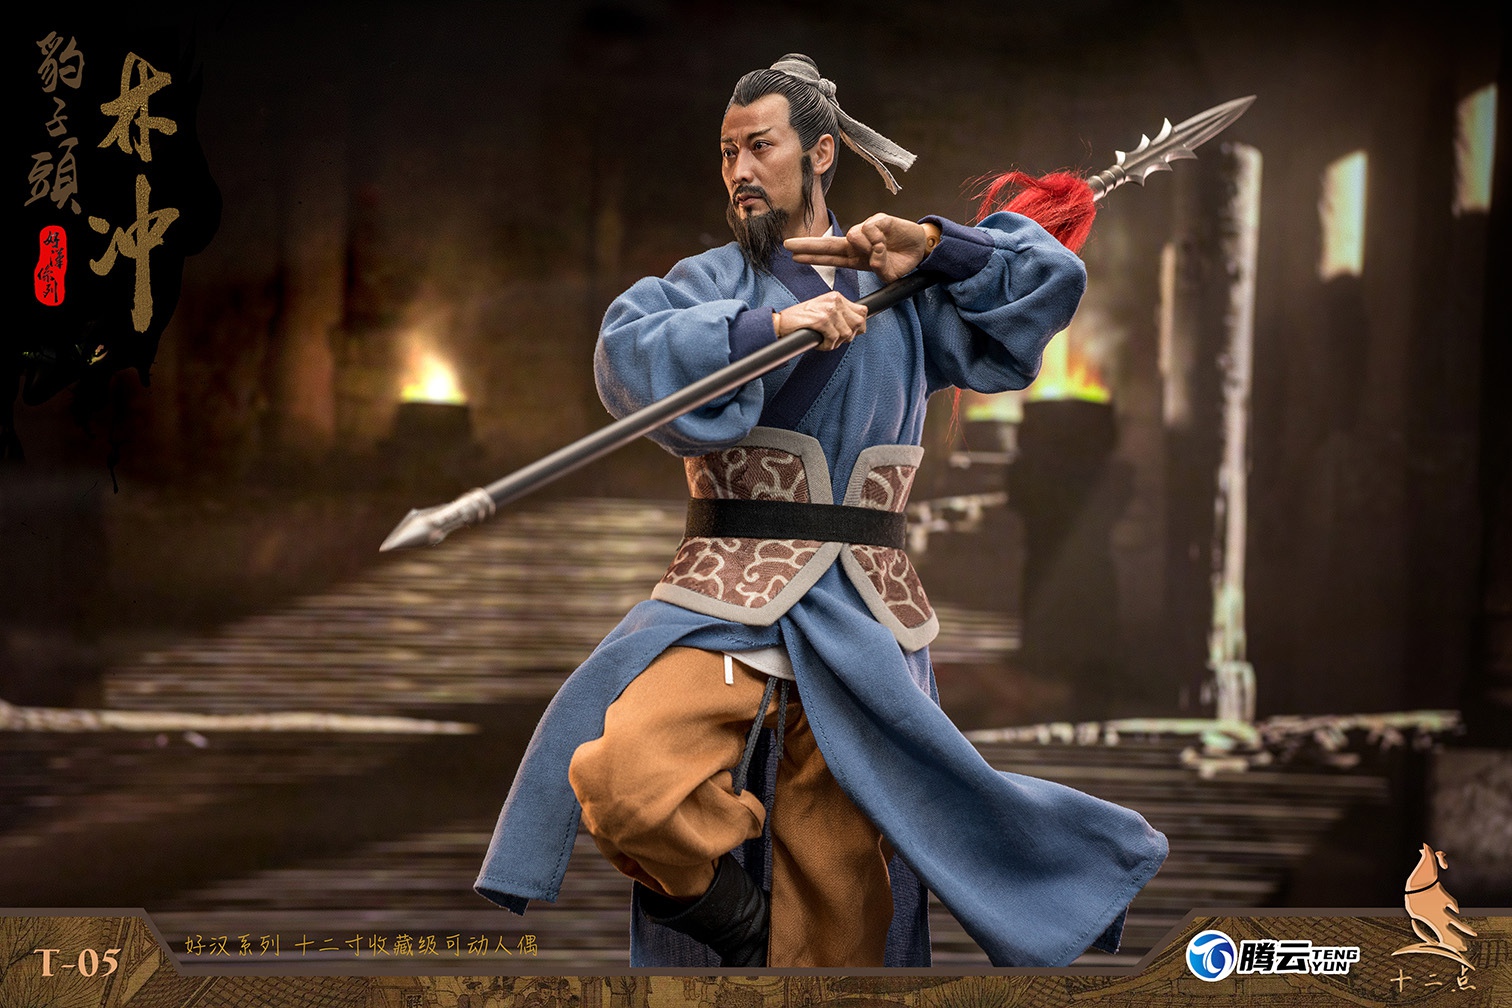 NEW PRODUCT: Twelve - Hero Series - Leopard Head Lin Chong Fengxue Mountain Temple Action Figure (T-05 /T-06) 09103